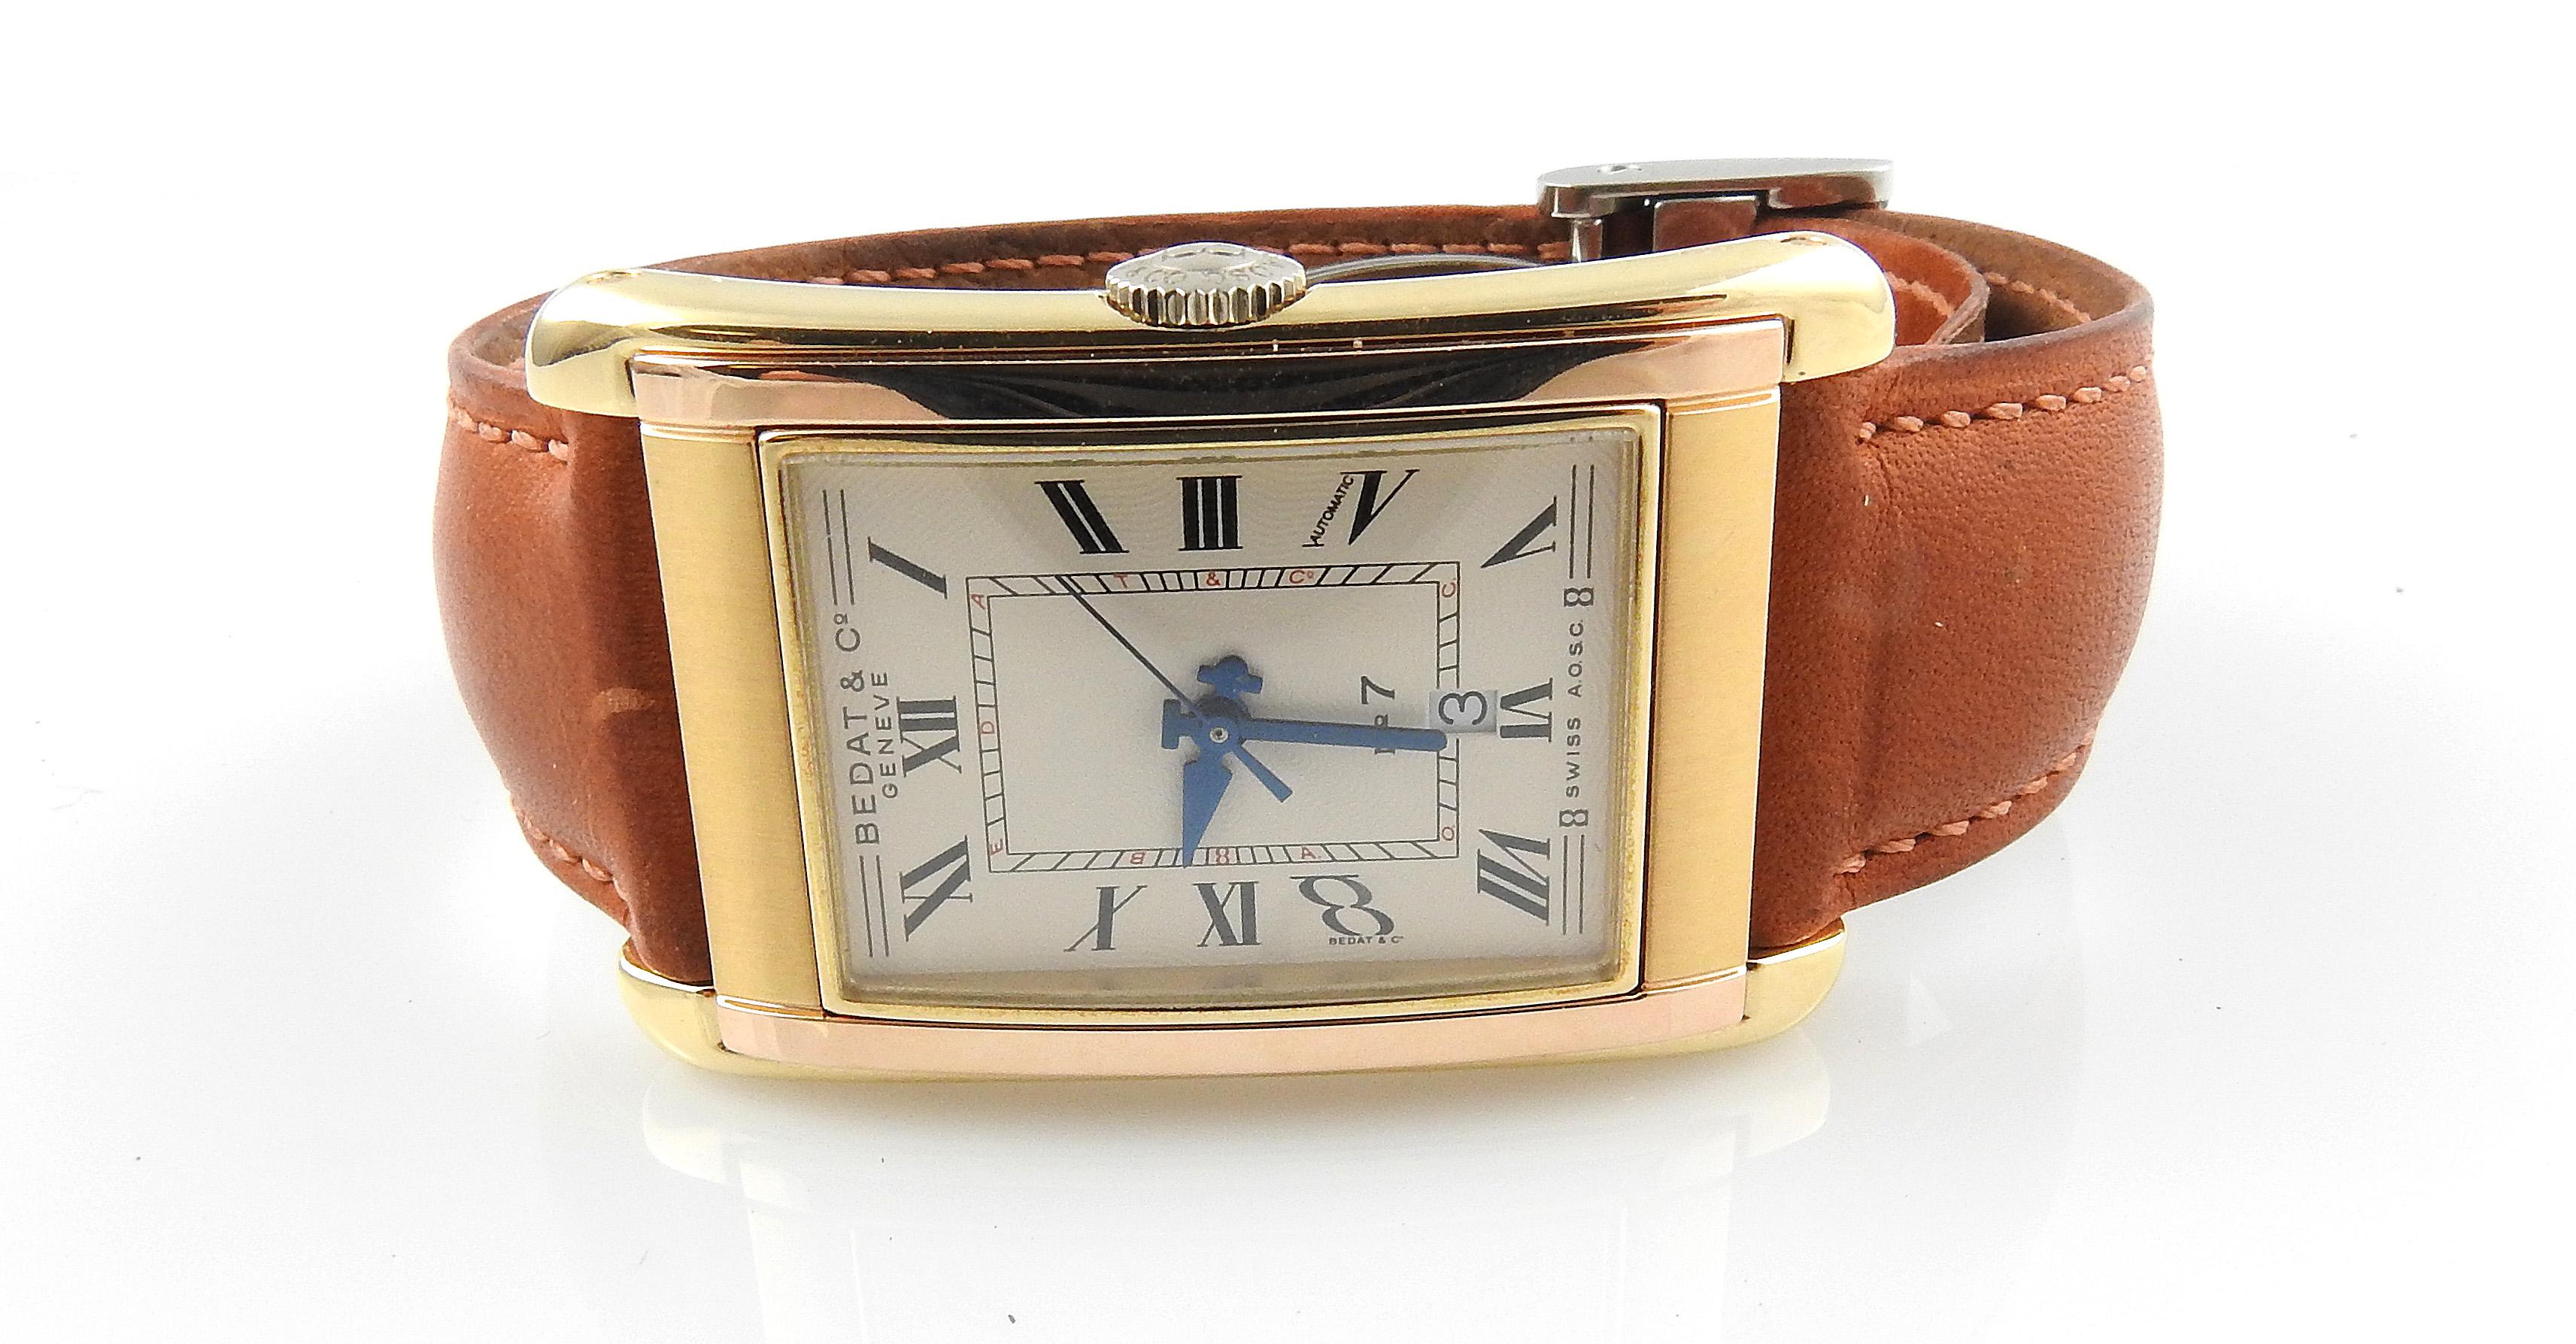 Bedat & Co. No. 7 18 Karat Tri Gold Men's Watch with Box and Papers 1